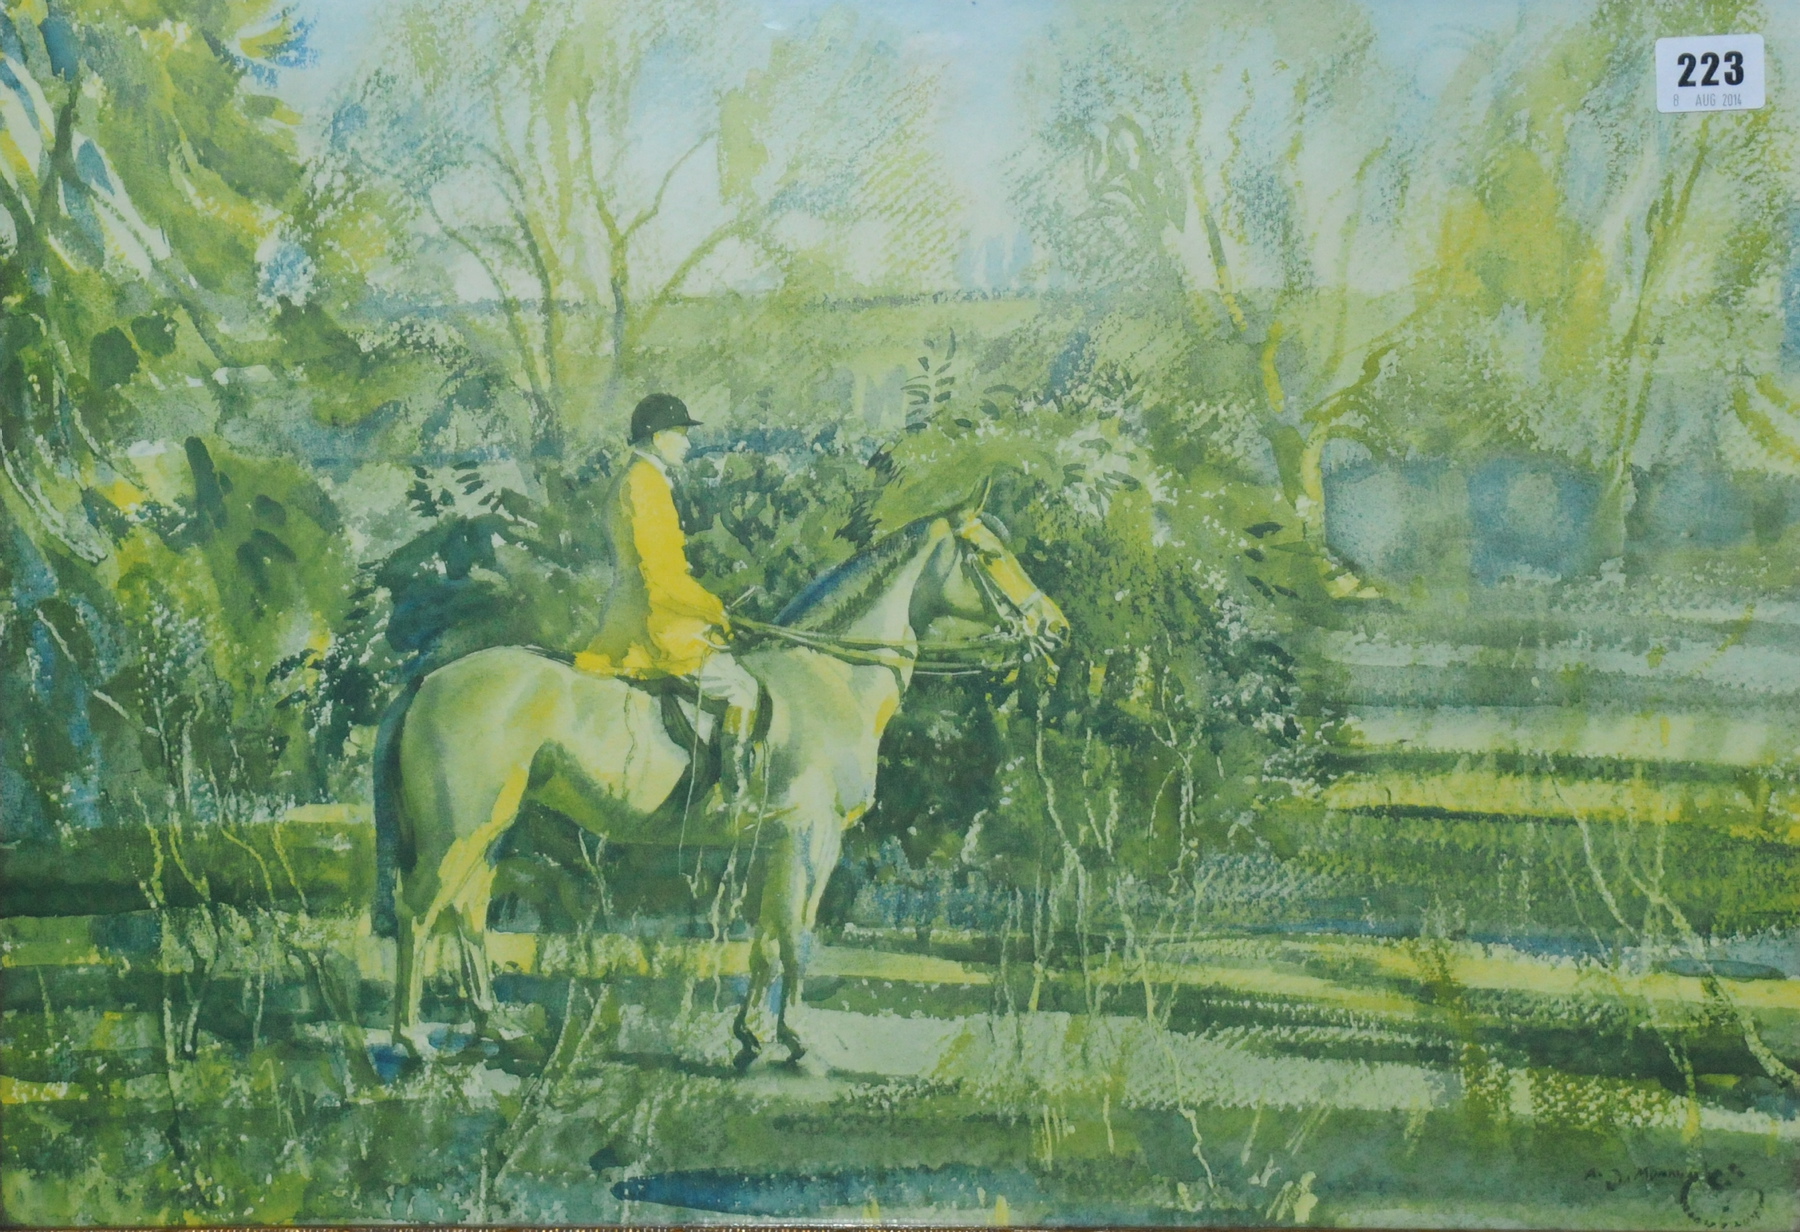 "The Whip", a signed artist's proof after an original oil painting by Alfred Munnings, signed in